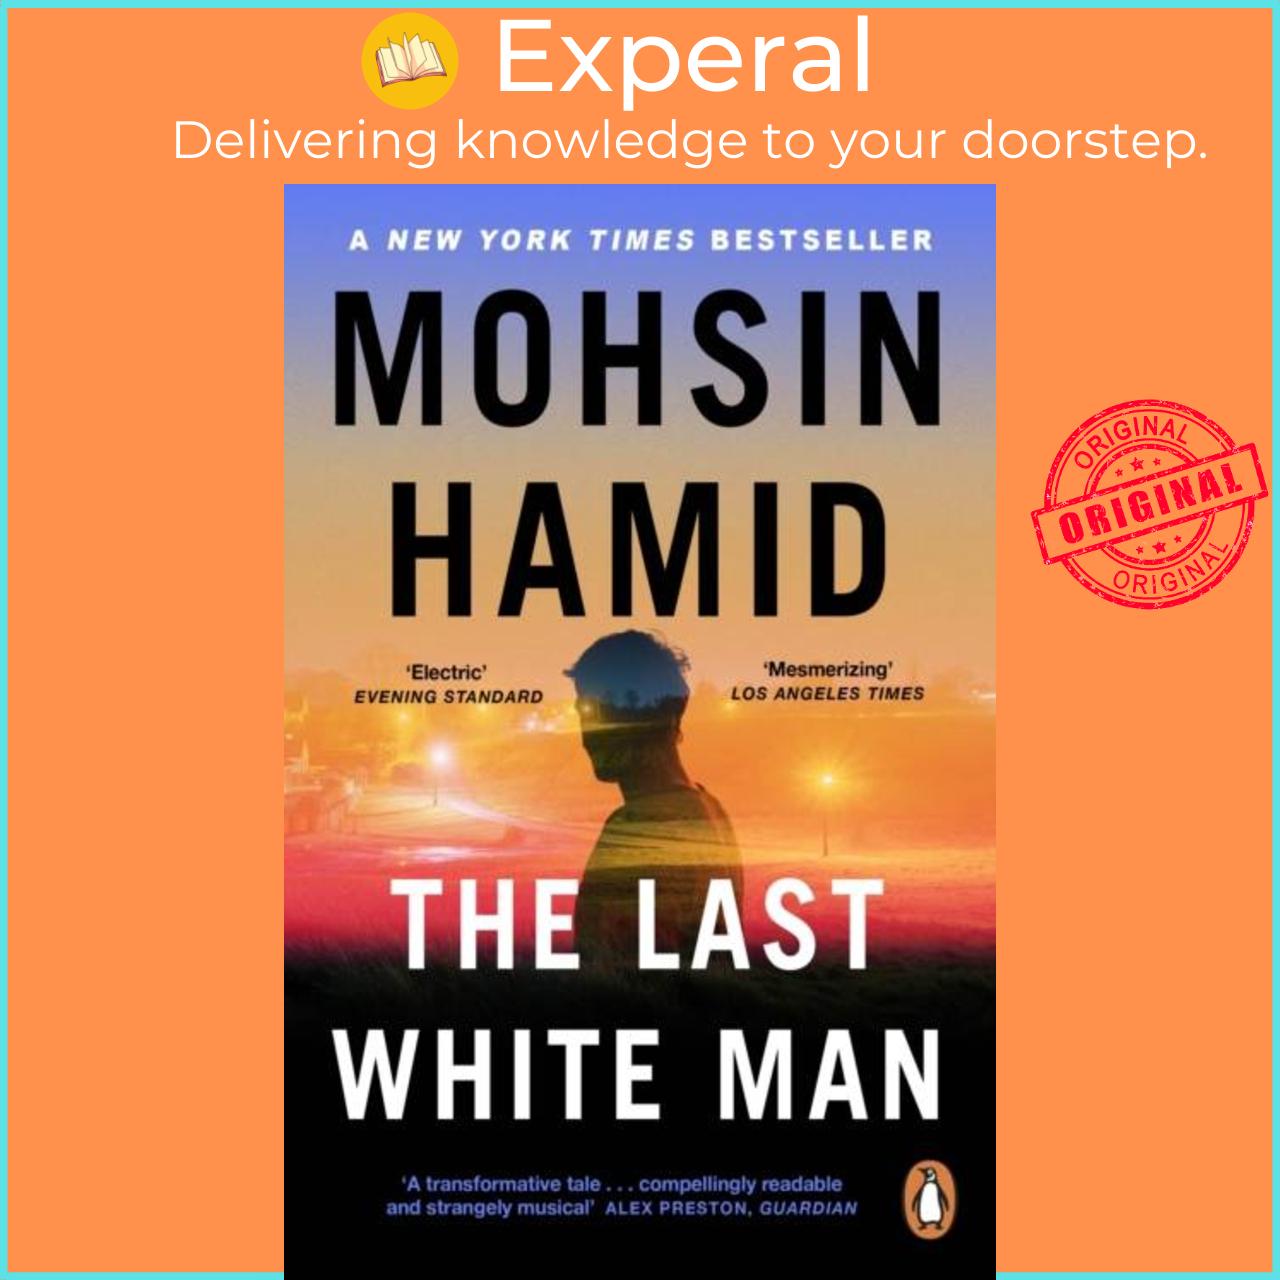 Sách - The Last White Man - The New York Times Bestseller 2022 by Mohsin Hamid (UK edition, paperback)